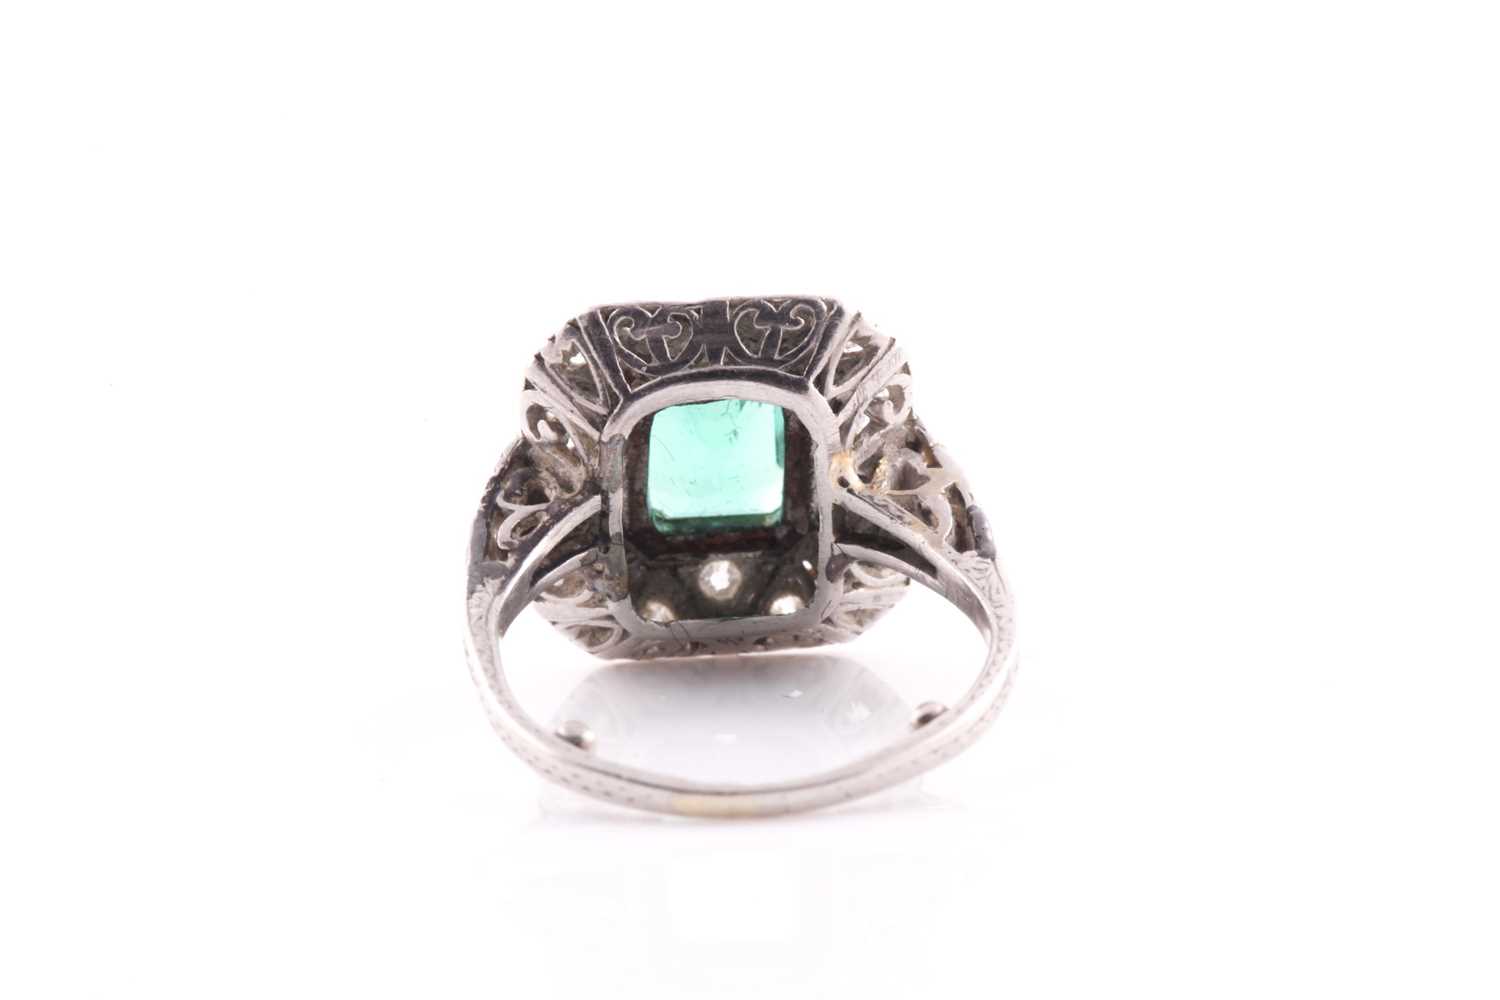 An emerald and diamond dress ring, set with an emerald-cut emerald, measuring approximately 7.8 x - Bild 3 aus 4